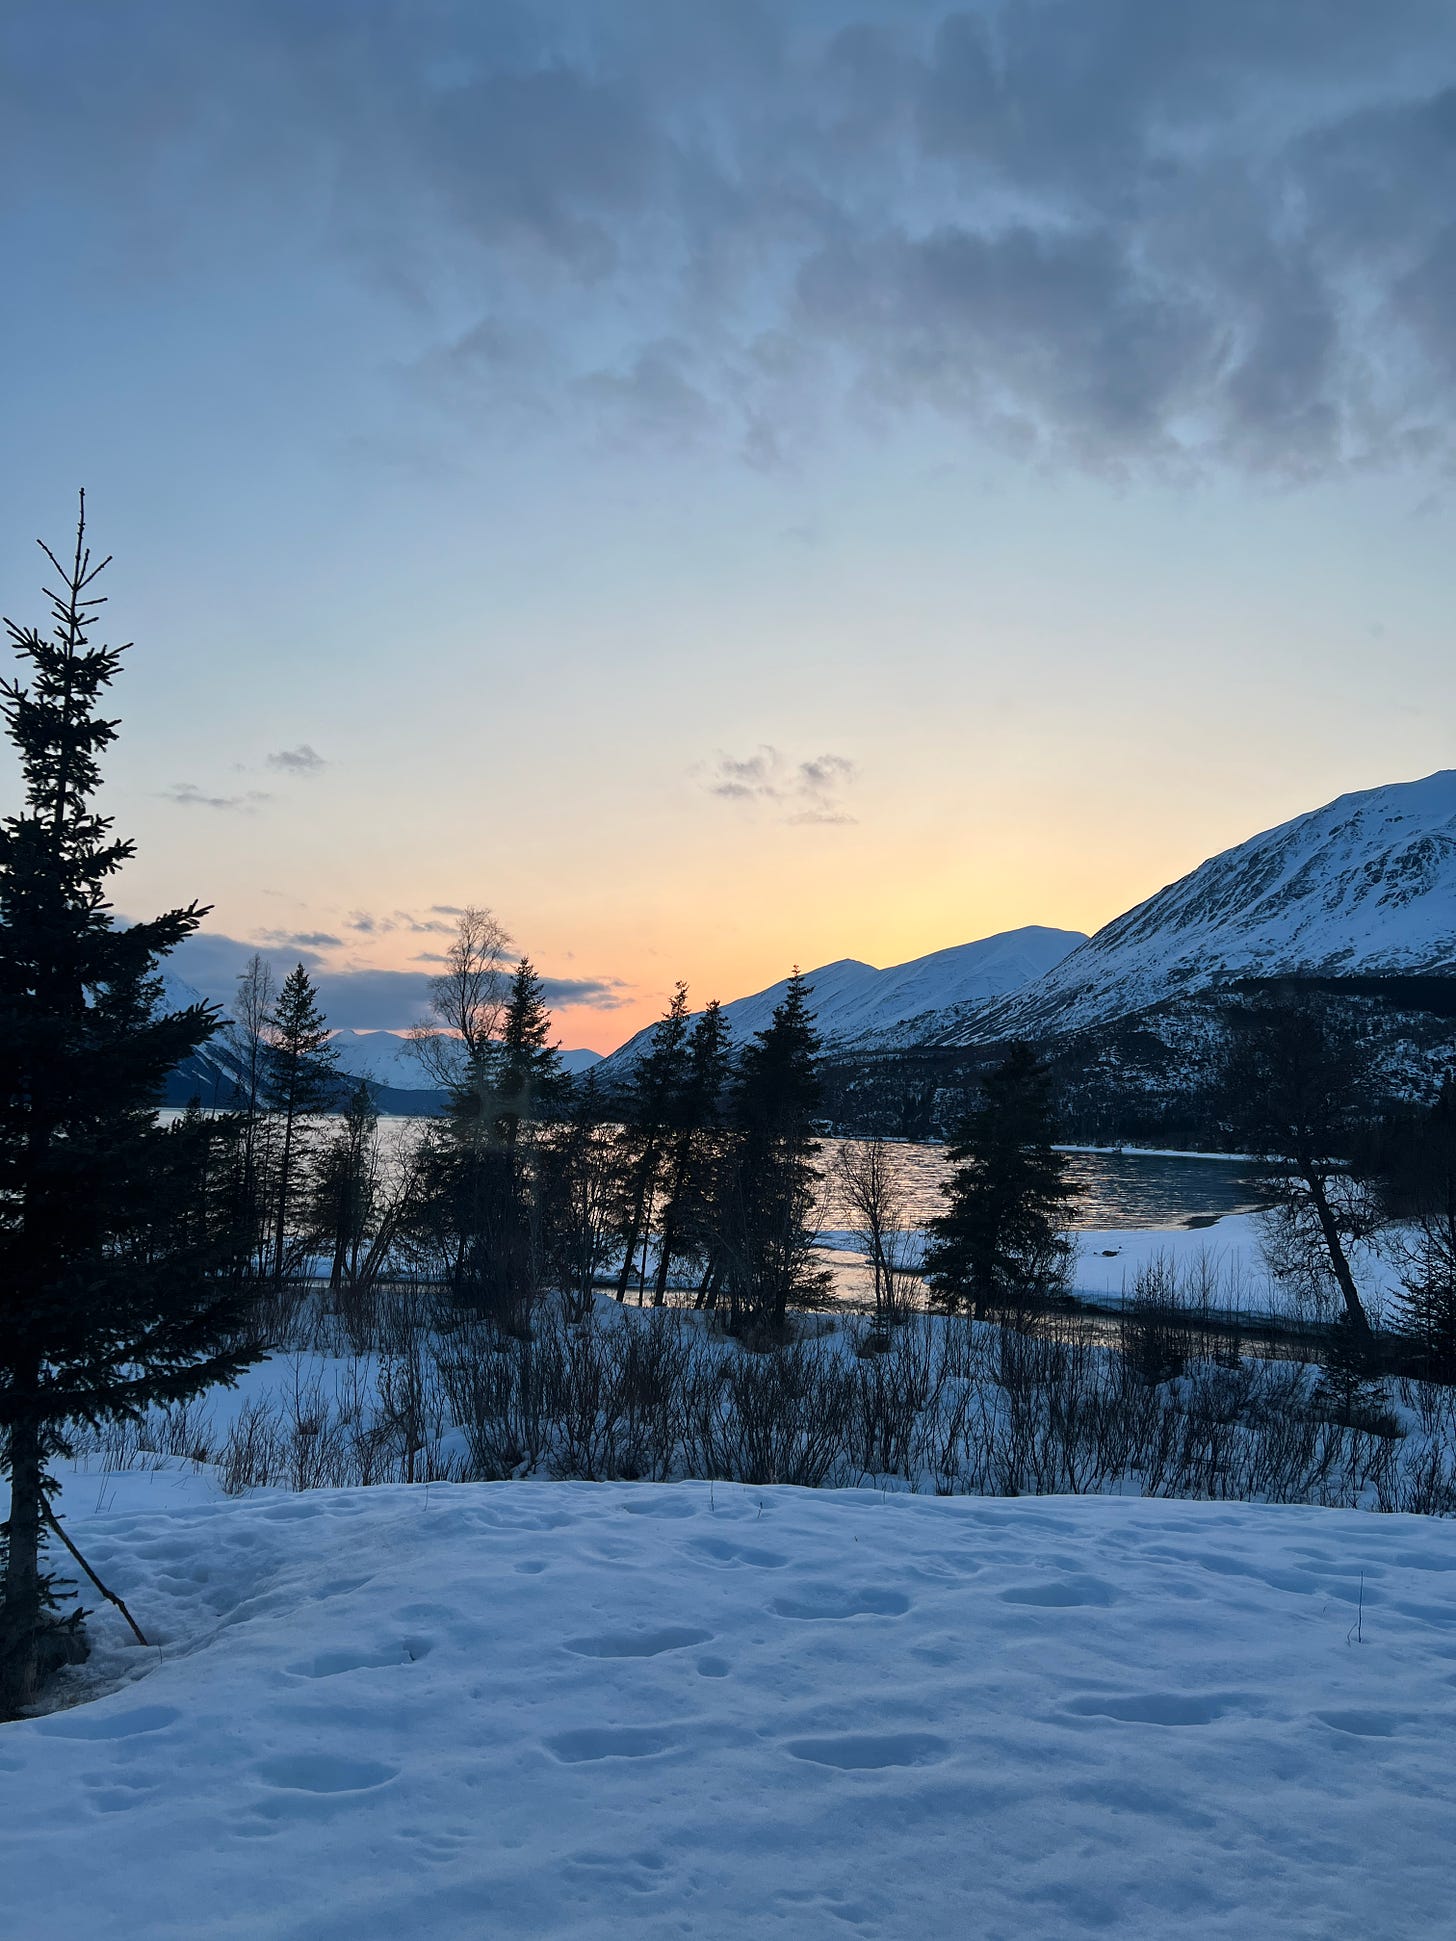 A beautiful snowy sunset over a lake in Alaska. The author would like it to hurry up and get dark and make with the Northern Lights already.